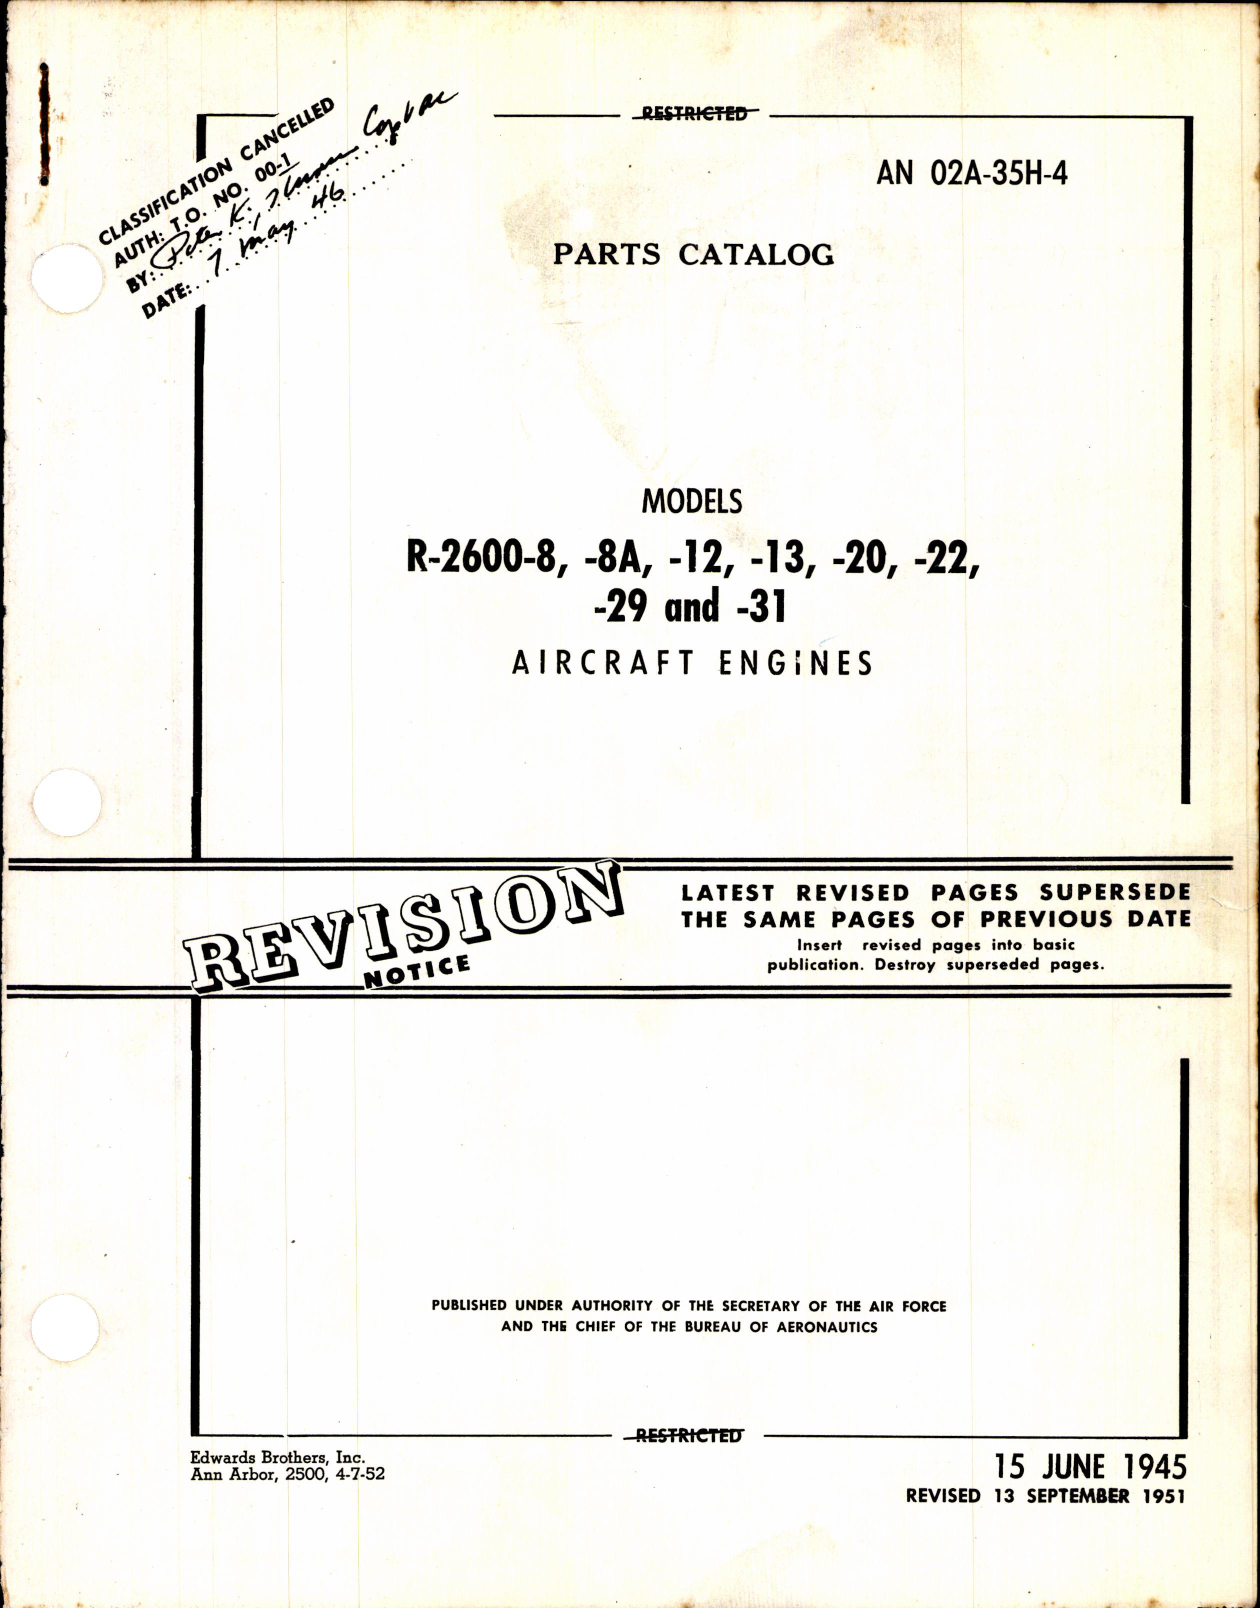 Sample page 1 from AirCorps Library document: Parts Catalog for Models R-2600-8